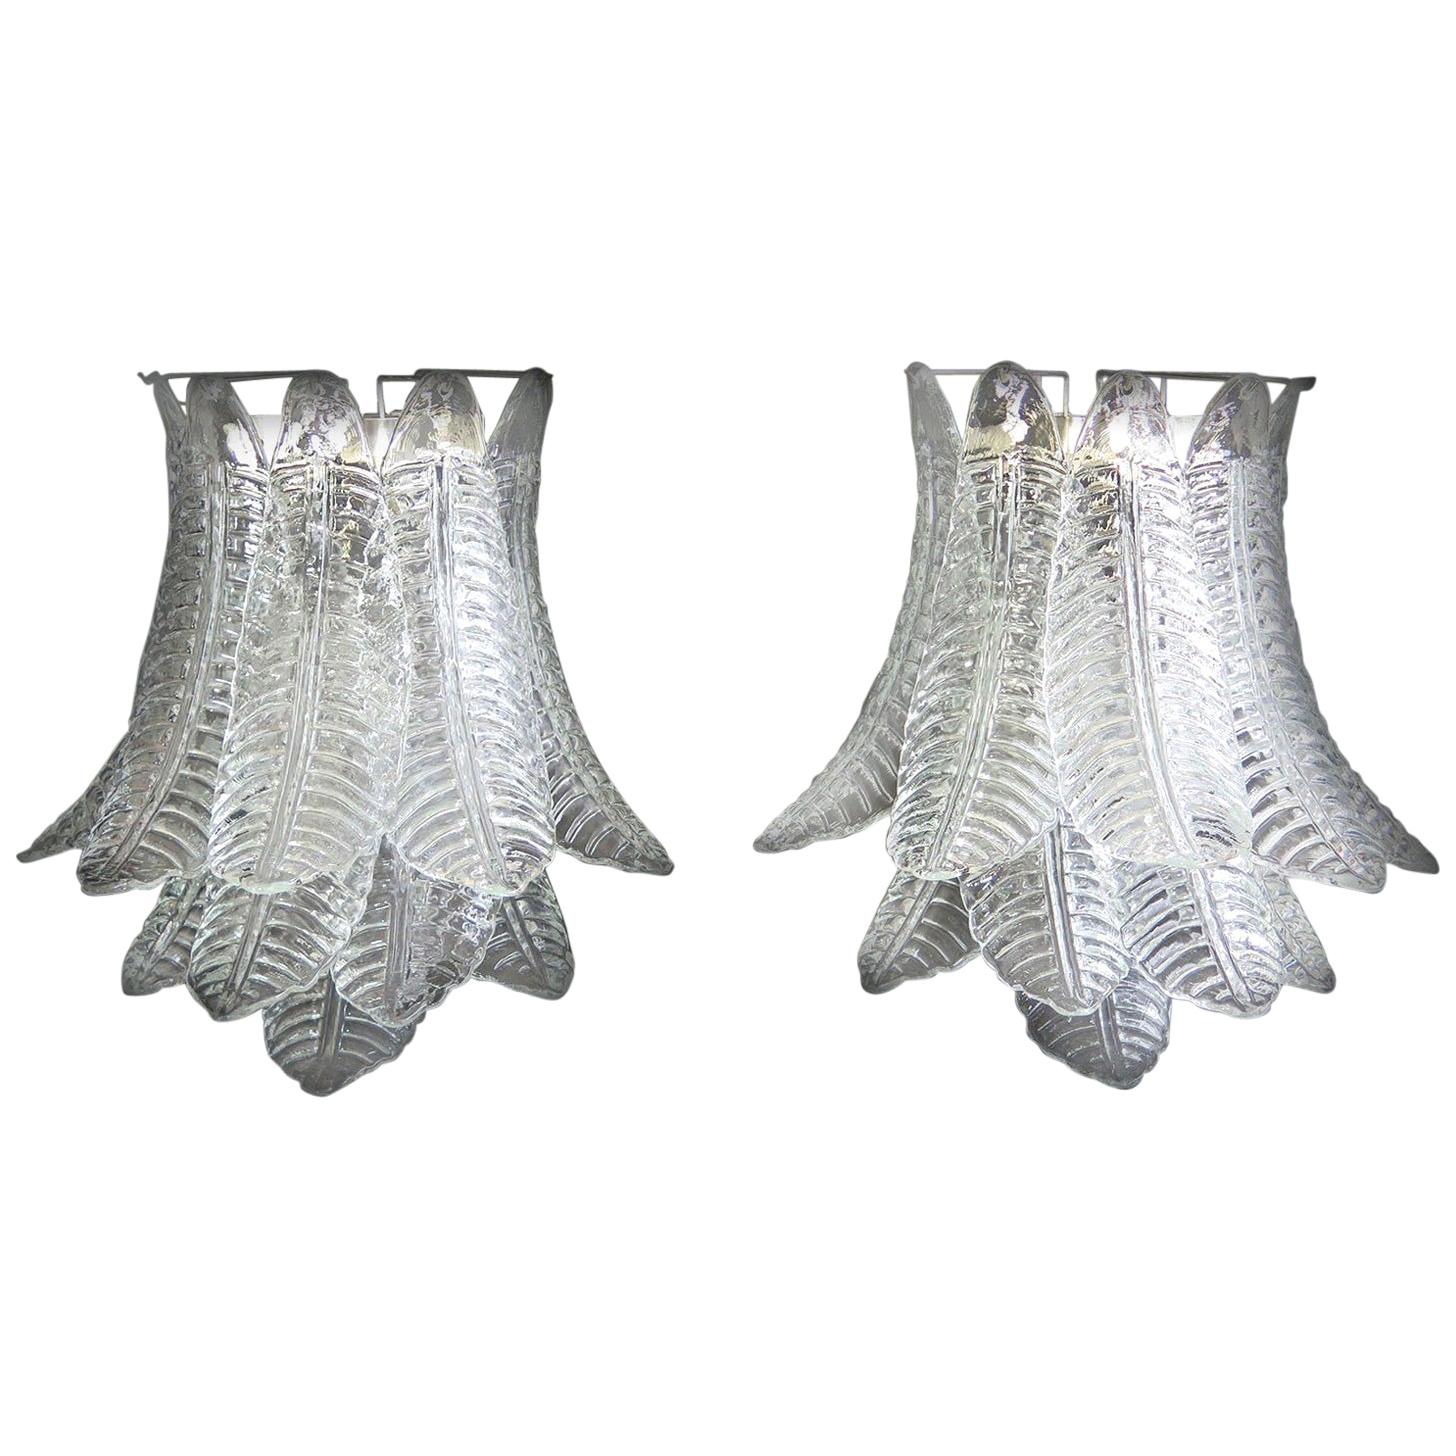 Pair of Italian Felci Leaves Sconces, Barovier & Toso Style, Murano For Sale